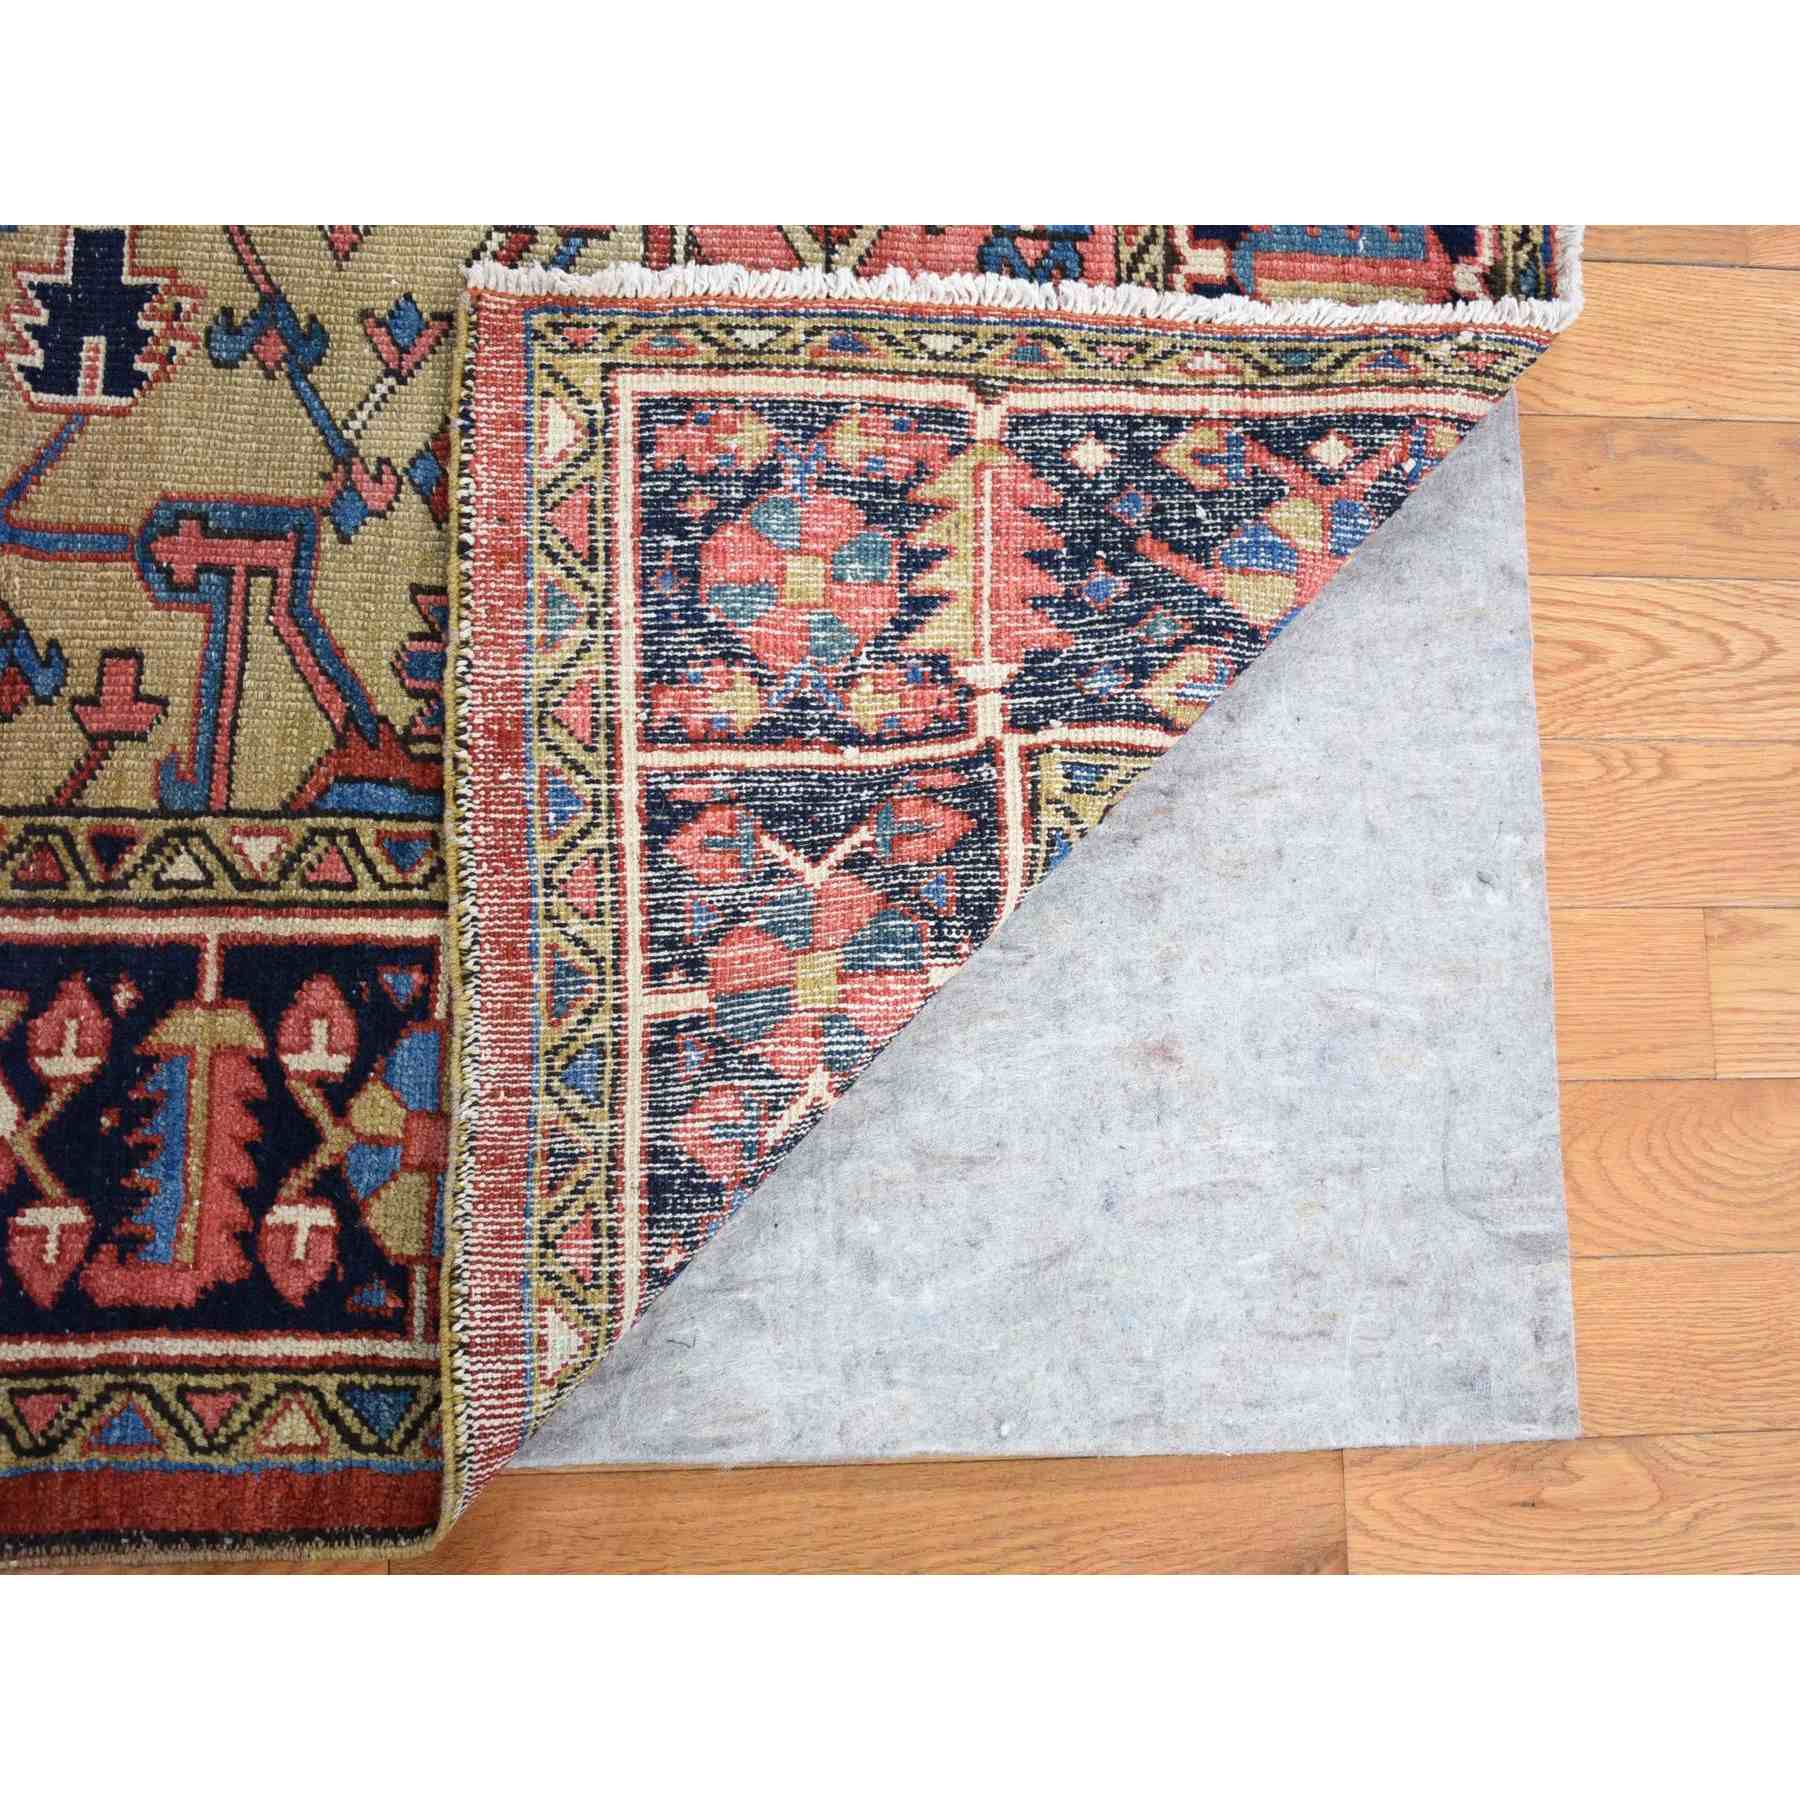 Antique-Hand-Knotted-Rug-401315